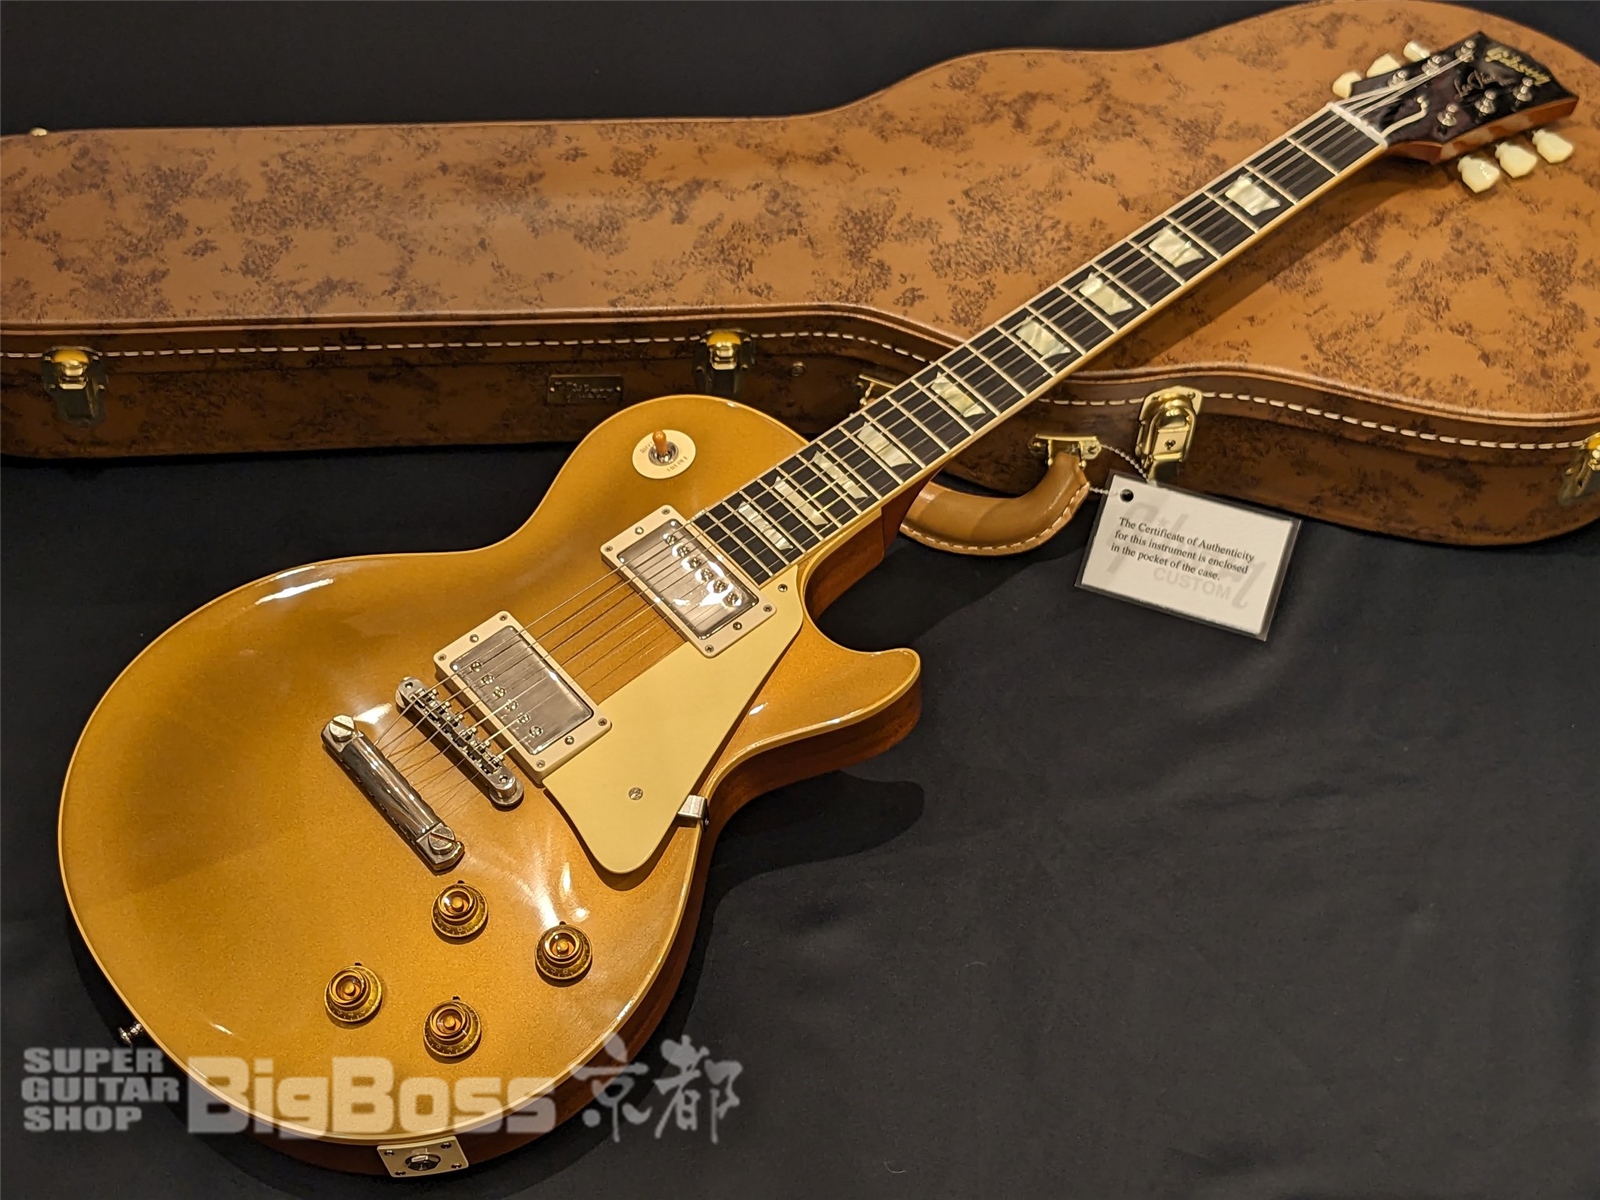 Gibson(ギブソン) Custom Shop Japan LTD 1957 Les Paul Gold Top Faded CherryBack VOS (Double Gold) 京都店